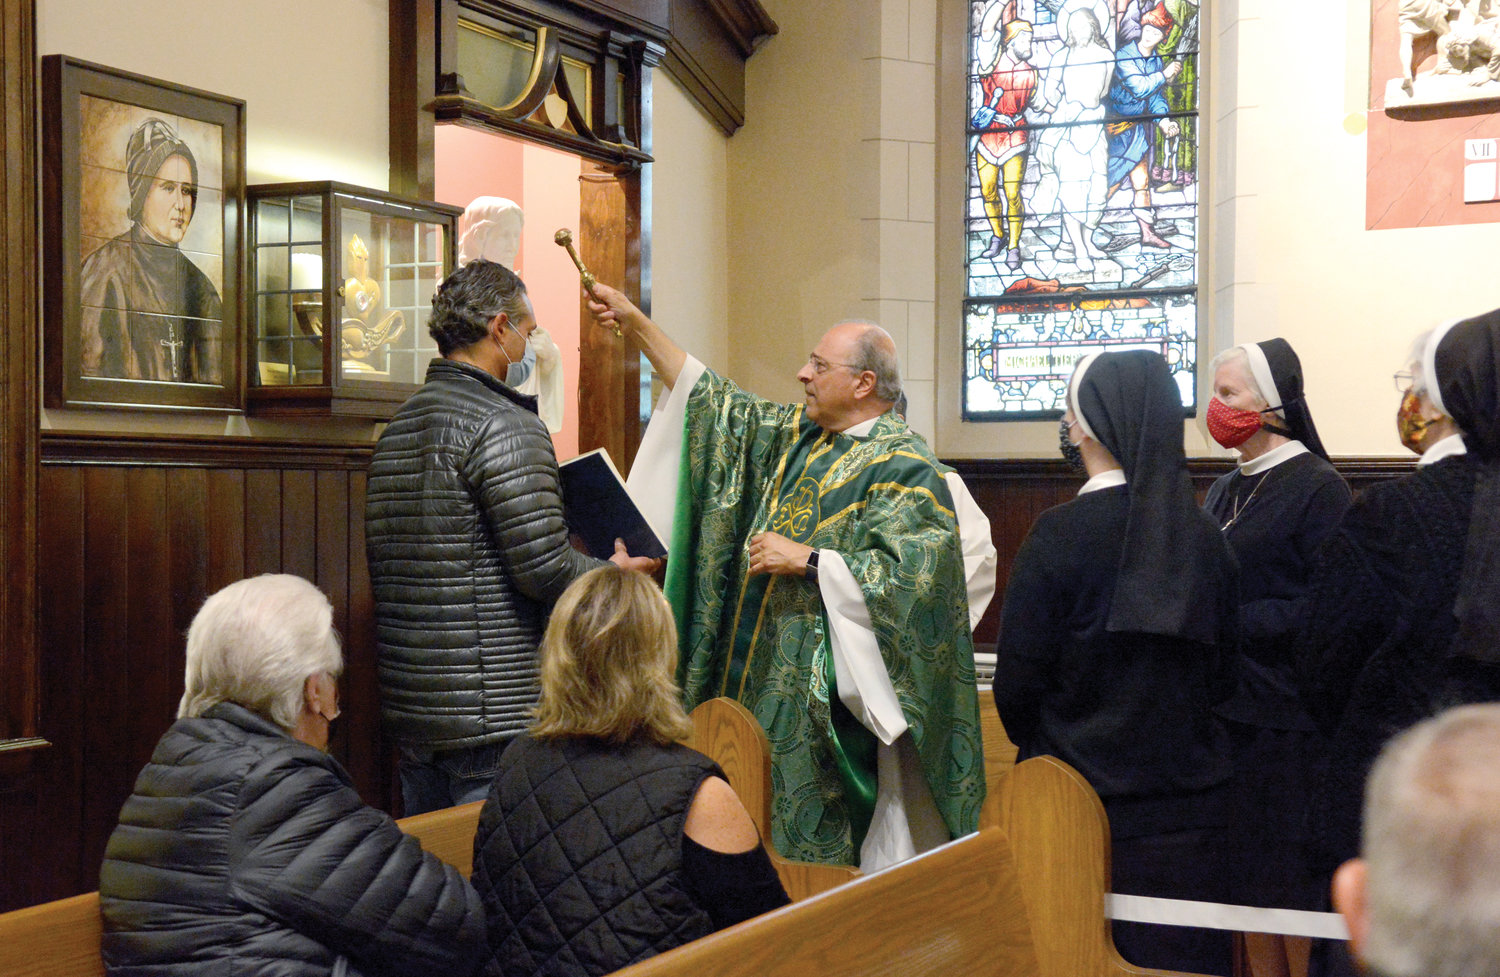 Father Anthony Sorgie, pastor of Immaculate Conception and Assumption of Our Lady parish in Tuckahoe, blesses a shrine to Blessed Clelia Merloni, foundress of the Apostles of the Sacred Heart of Jesus, during Vigil Mass he offered Oct. 17 at Immaculate Conception Church. Holding the Book of Blessings is Frank Musorrafiti, a captain of the Hartsdale Fire Department and parishioner of Sacred Heart, Hartsdale. He is a 1987 alumnus of the closed Sacred Heart Private School on Zerega Avenue in the Bronx, where Blessed Clelia’s congregation served. Sister Barbara Thomas, A.S.C.J., provincial superior of the U.S. Province of the Apostles of the Sacred Heart of Jesus in Hamden, Conn., is at front, red mask.